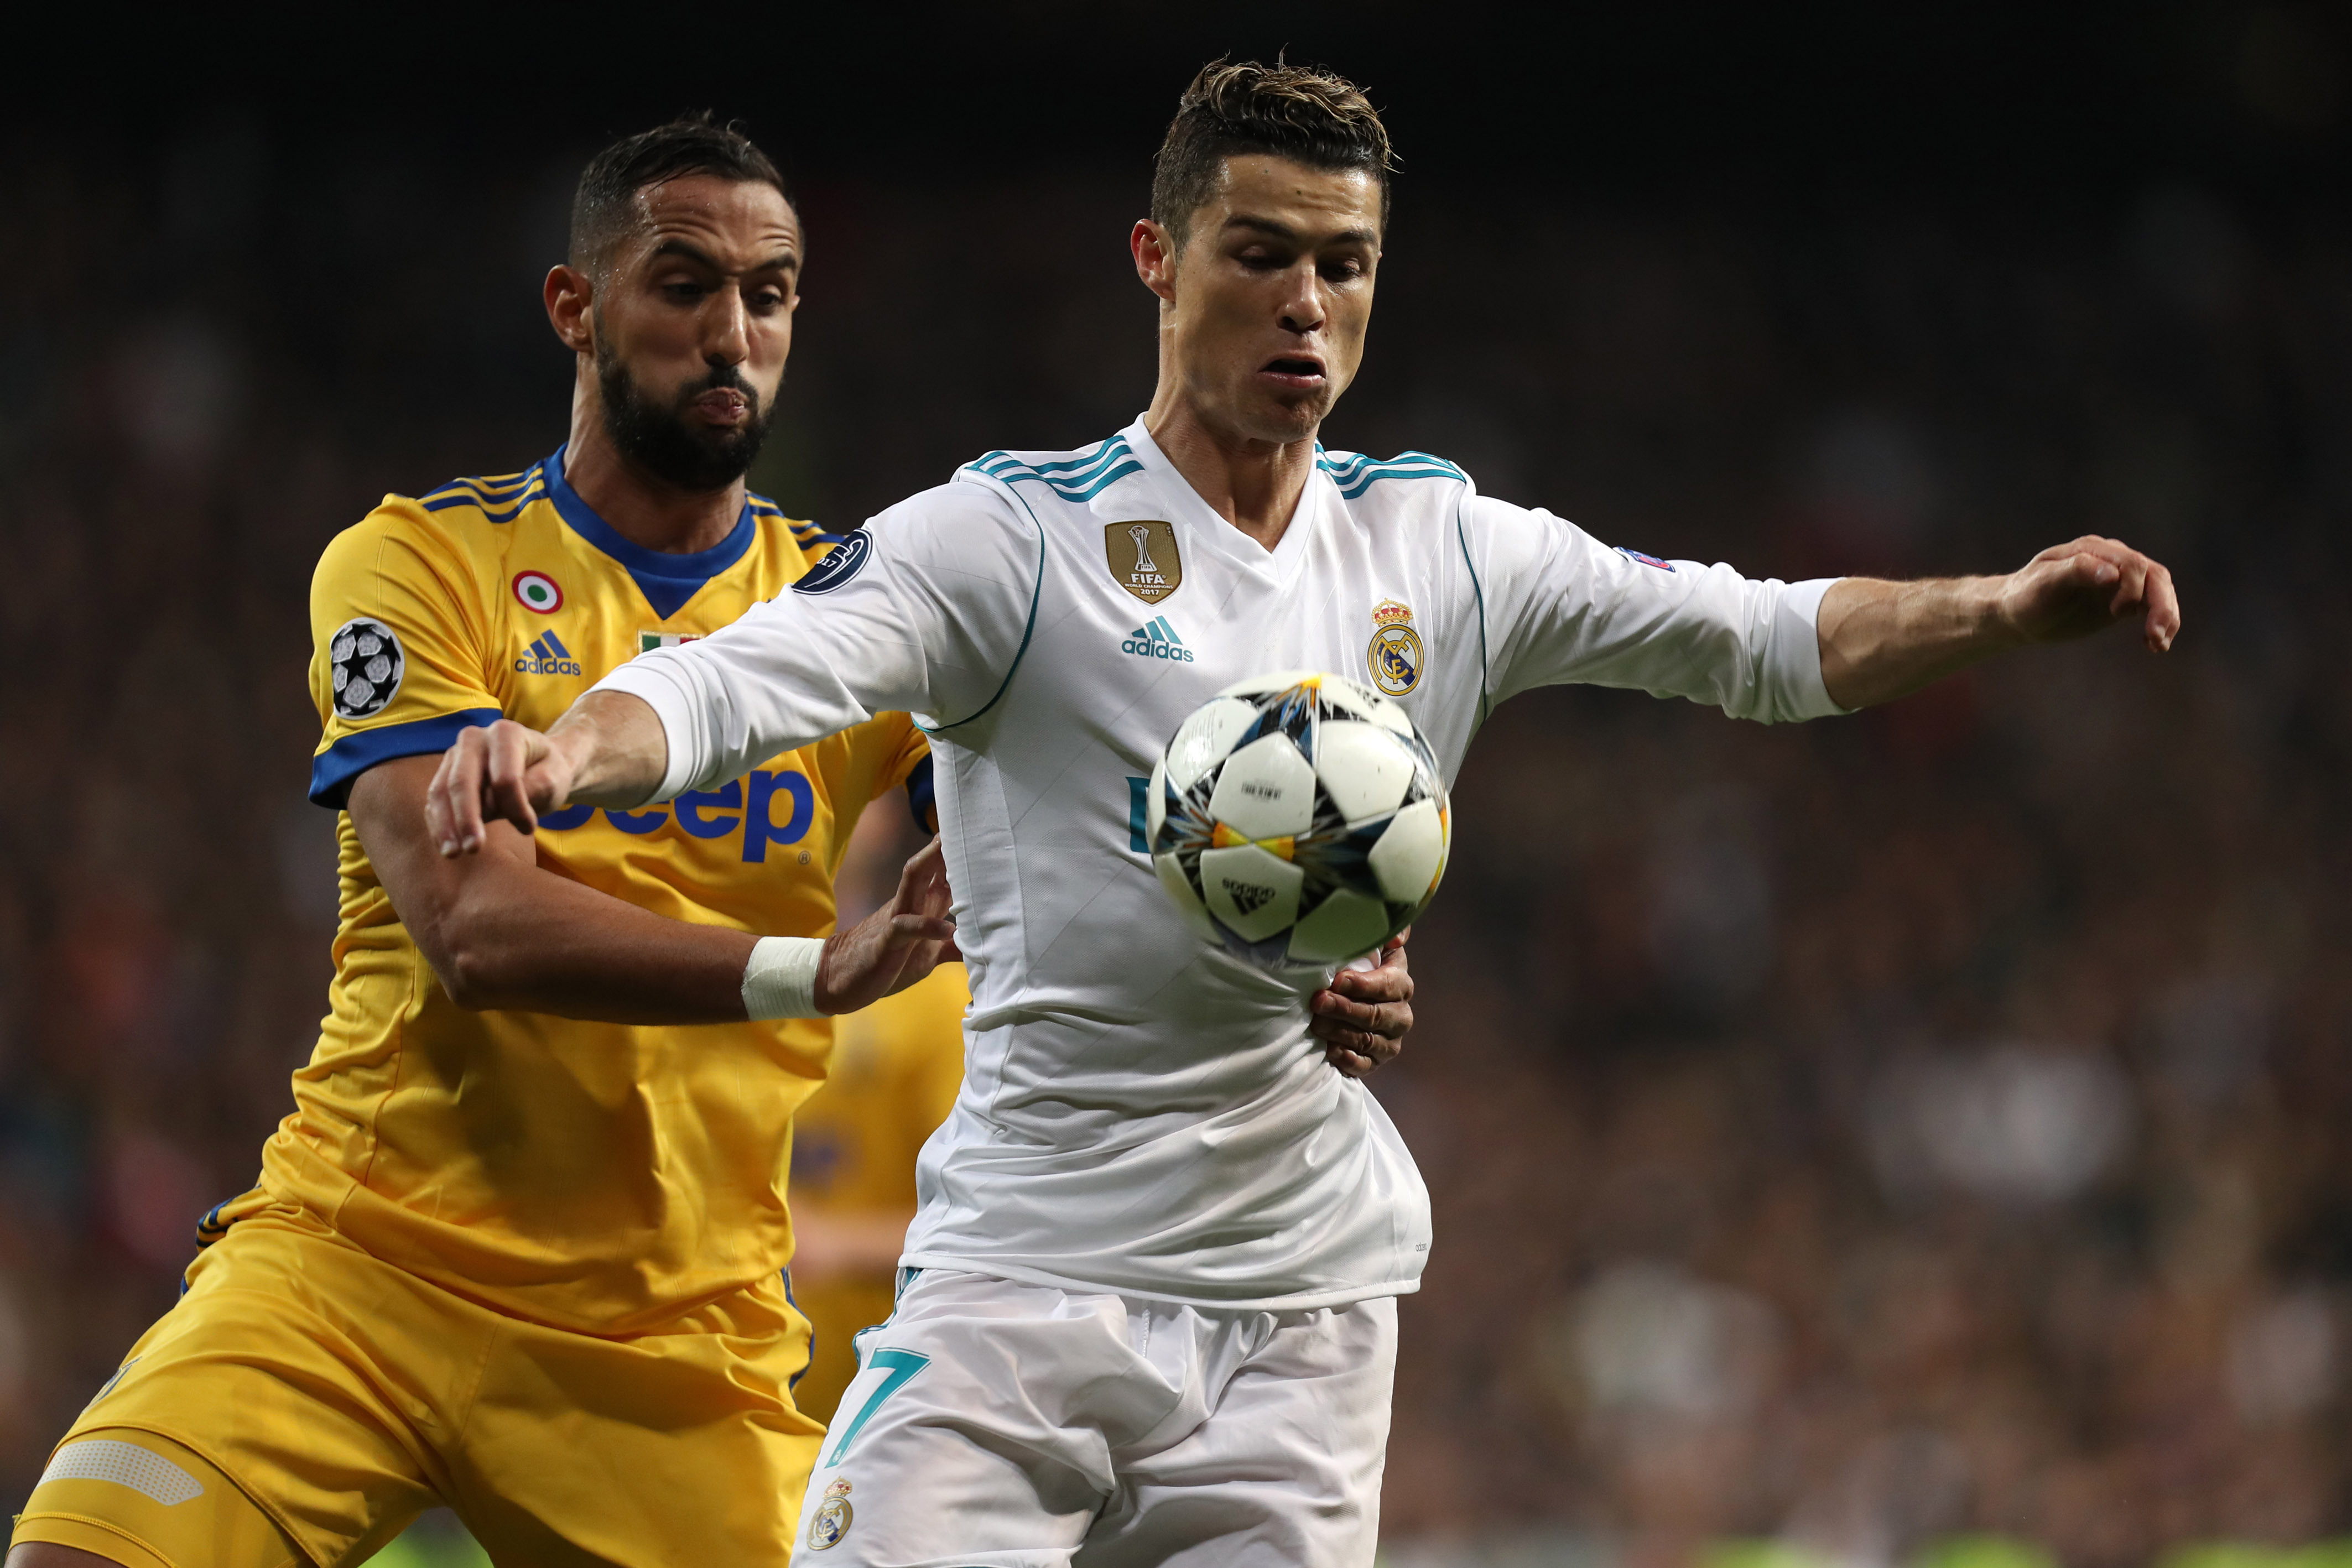 Cristiano Ronaldo 'Not Normal' After Text He Sent Teammate At 11pm After Game